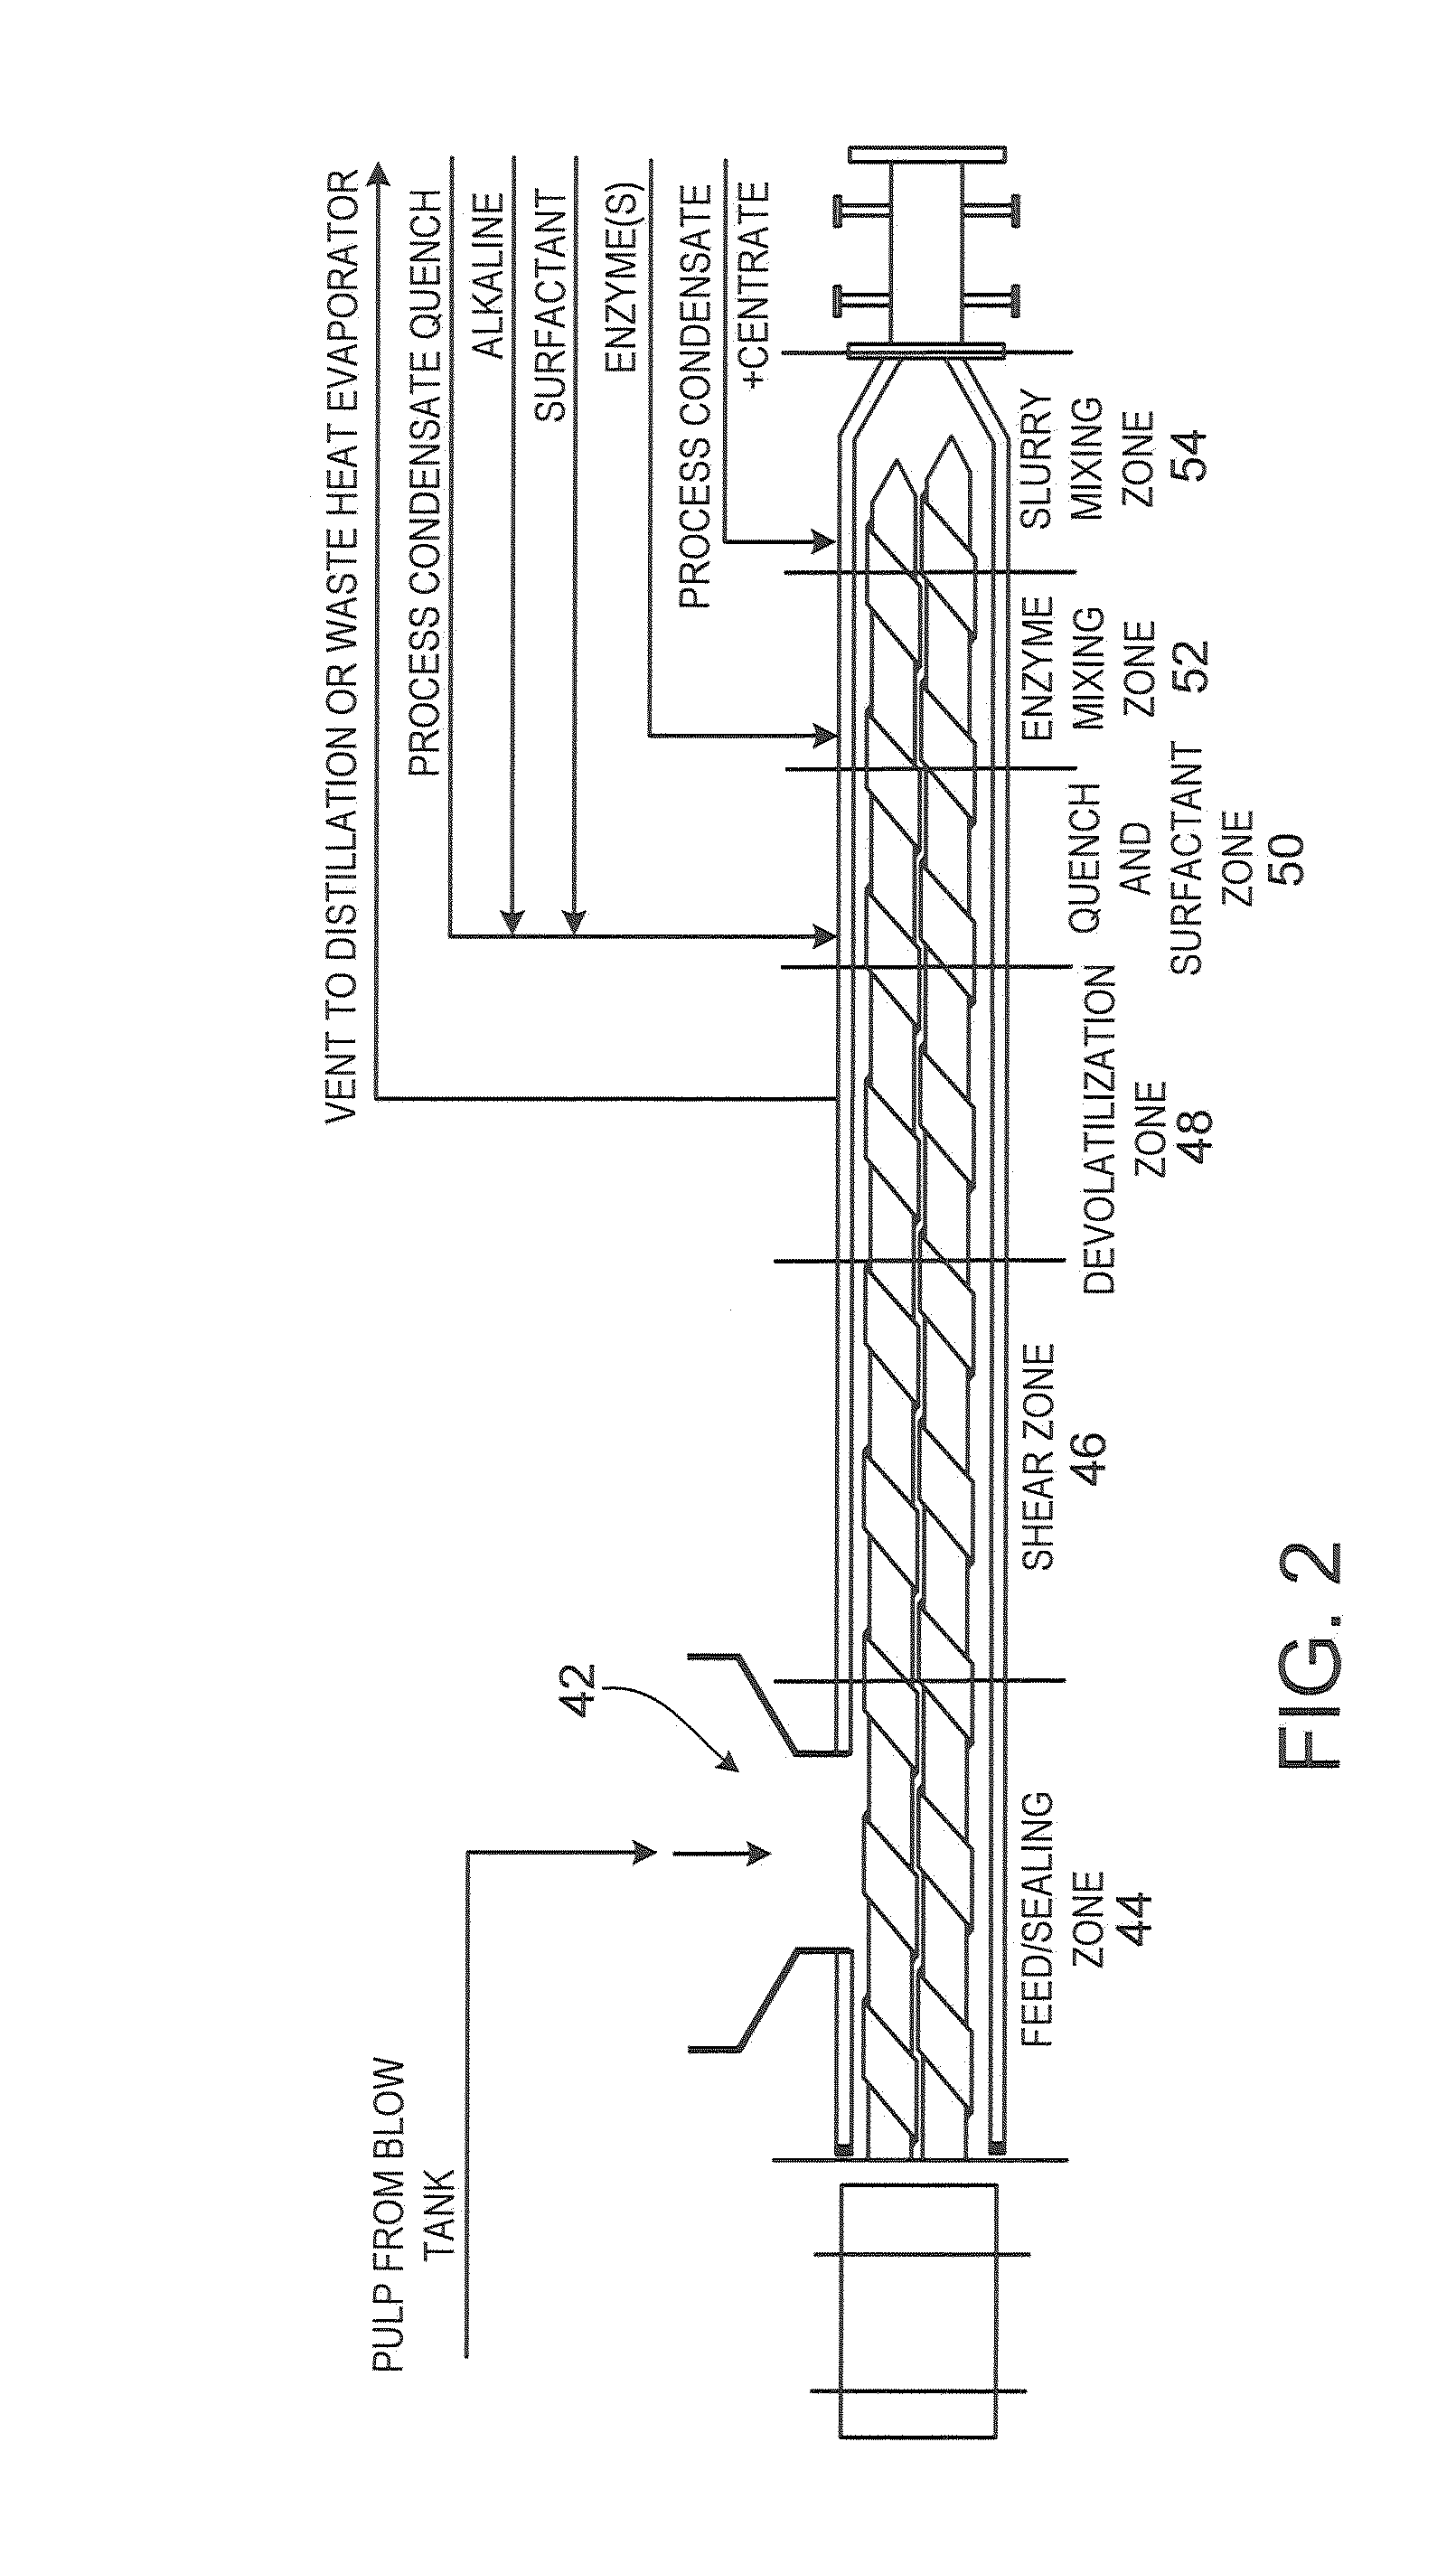 Process for Thermal-Mechanical Pretreatment of Biomass